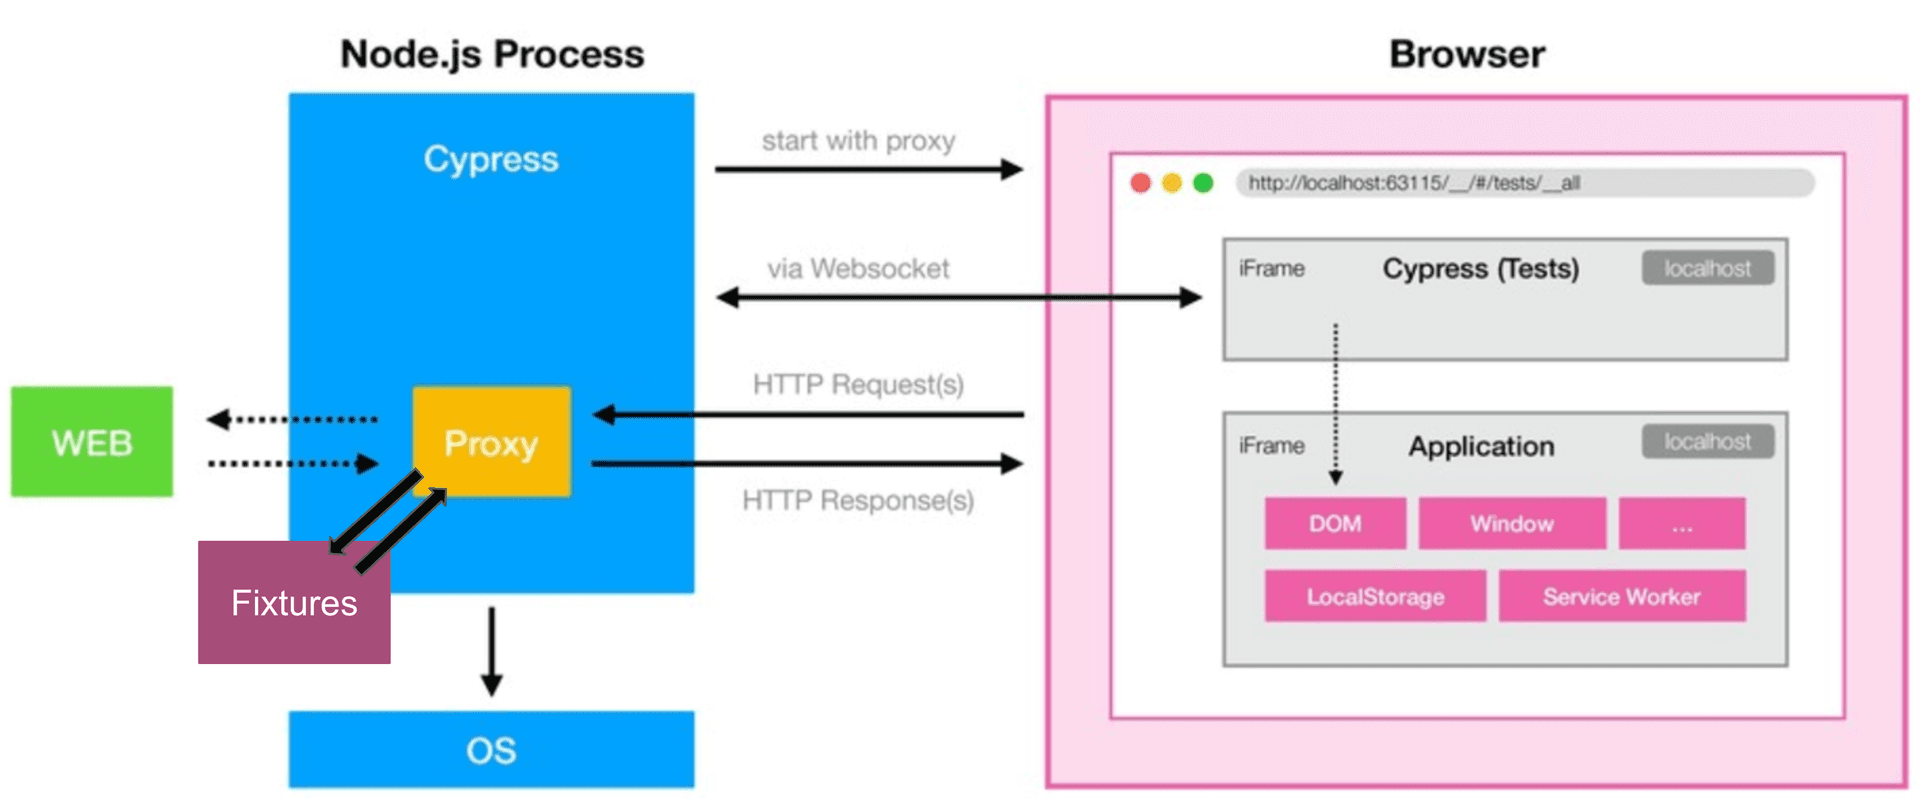 Cypress' architecture consists of a Node.js process (that also acts as HTTP proxy) and iFrames in an instrumentalised browser